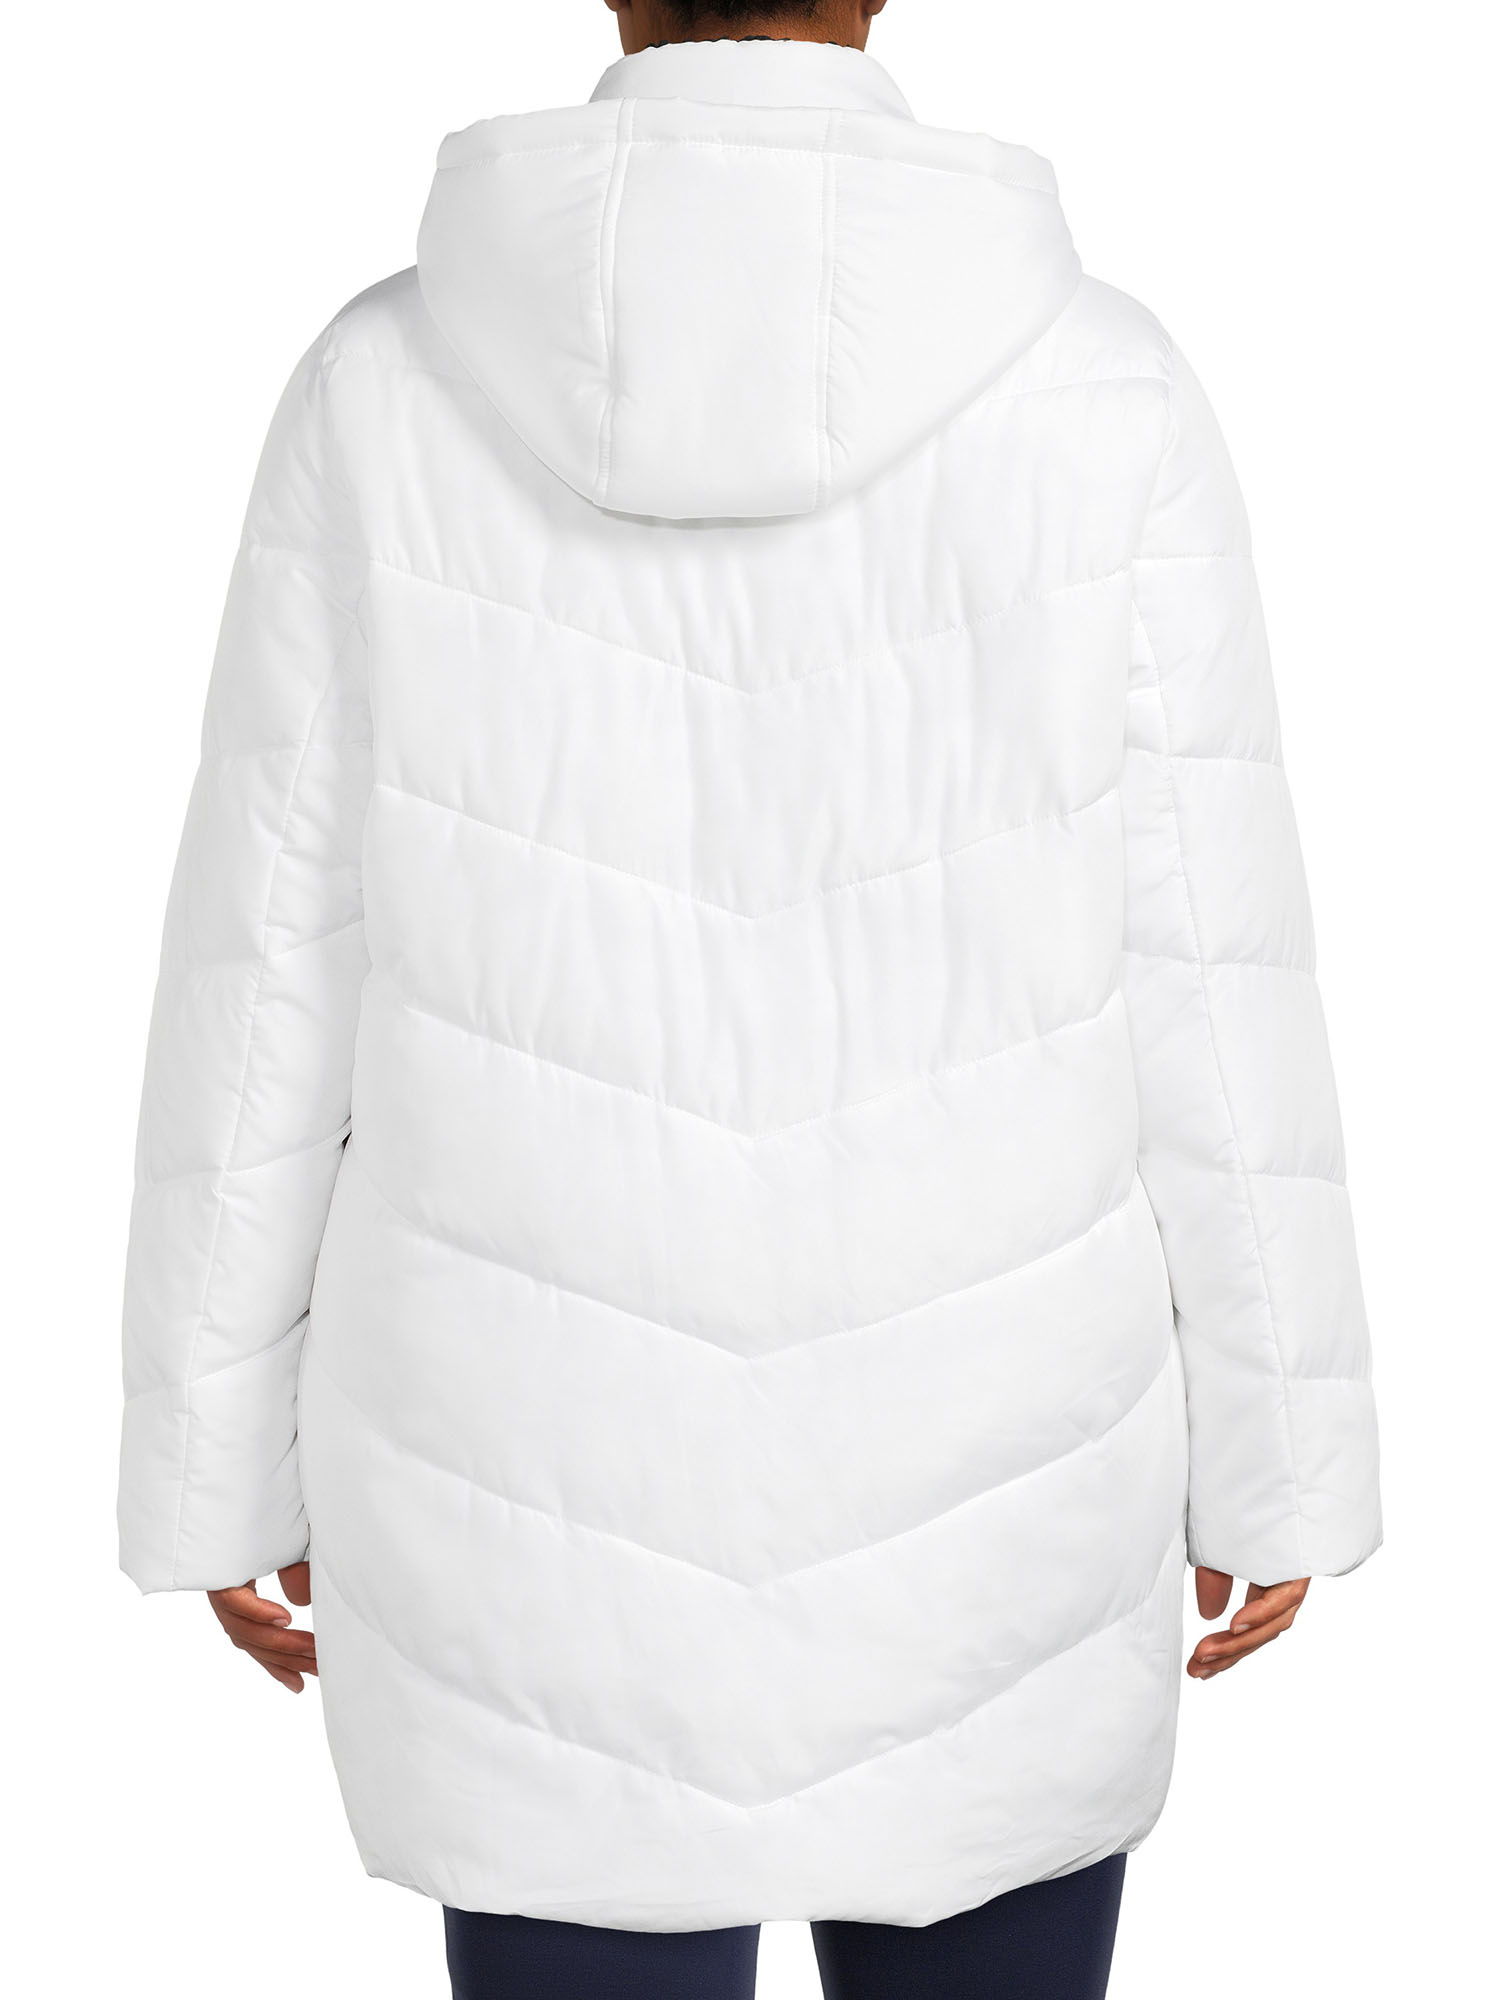 Big Chill Women's Chevron Quilted Puffer Jacket with Hood, Sizes 1X-3X - image 2 of 6